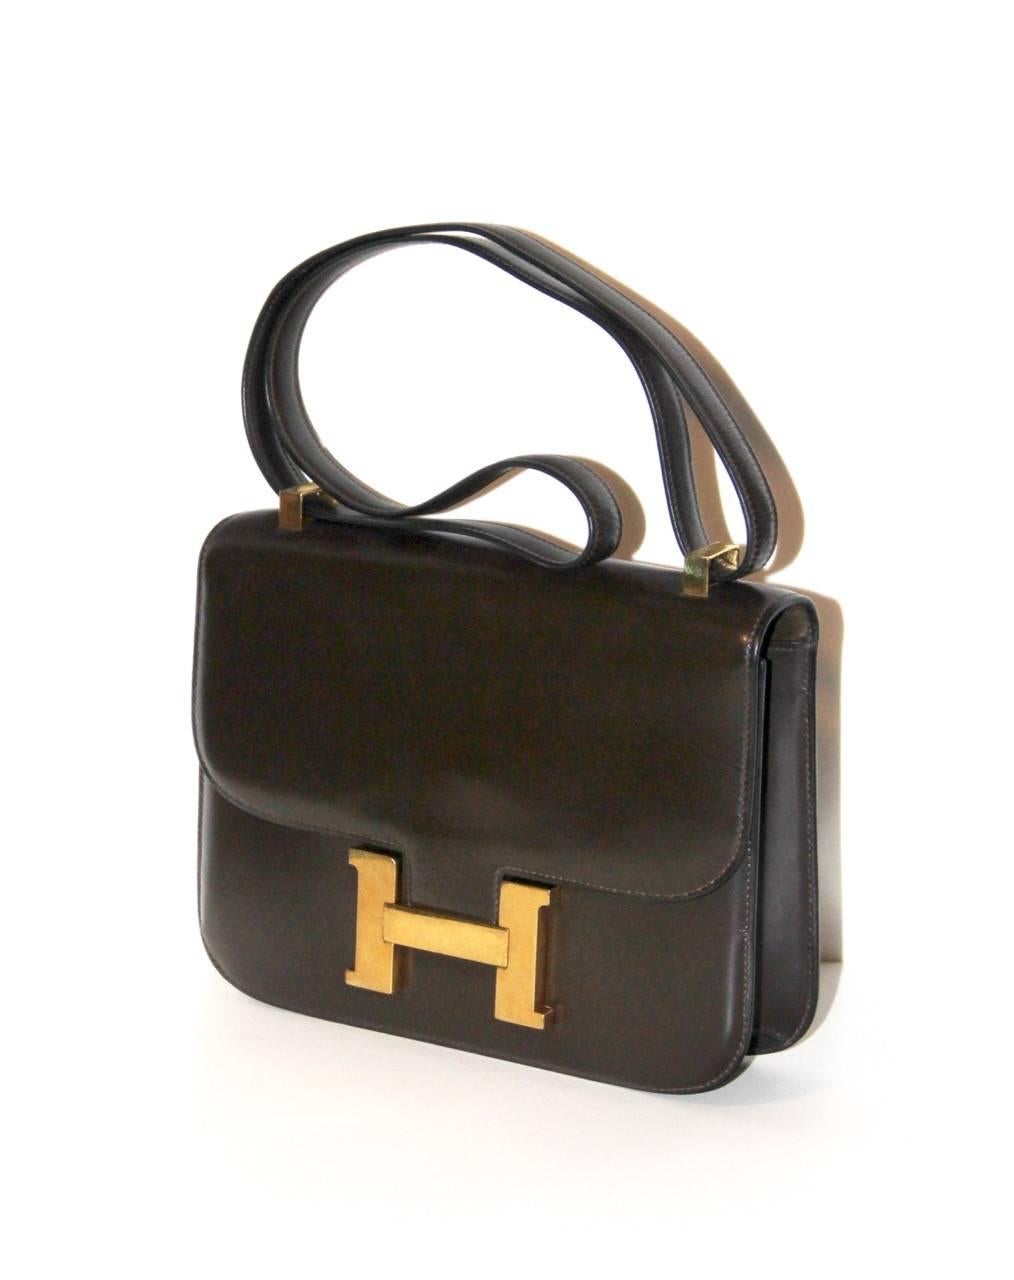 Since its original design in 1969 by Catherine Chaillet and its time spent on the arm of fashion icon Jacqueline Kennedy Onassis, the Hermès Constance has maintained its status as the epitome of classic elegance. Its sleek lines and gold H clasp